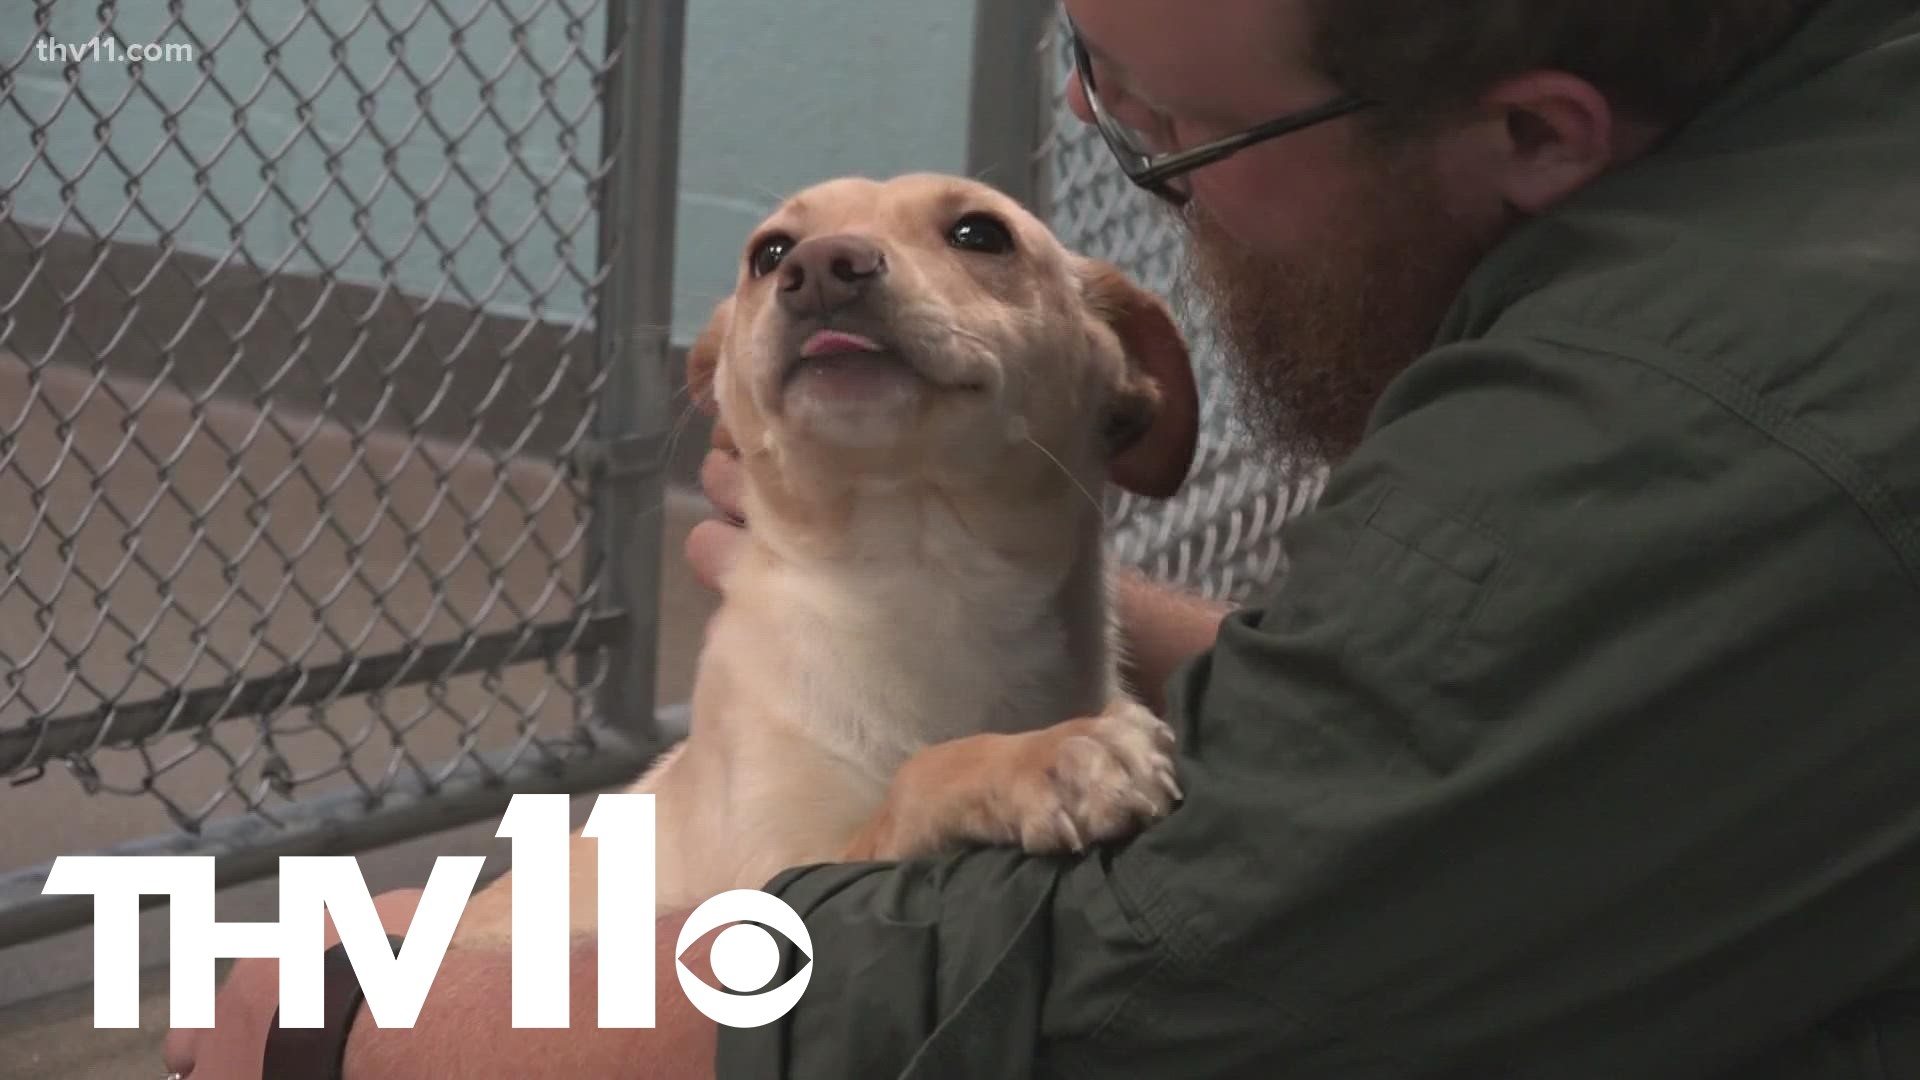 Many animals were adopted at the beginning of the pandemic. Now as people have returned to working full-time, animal shelters in Arkansas are at full capacity.